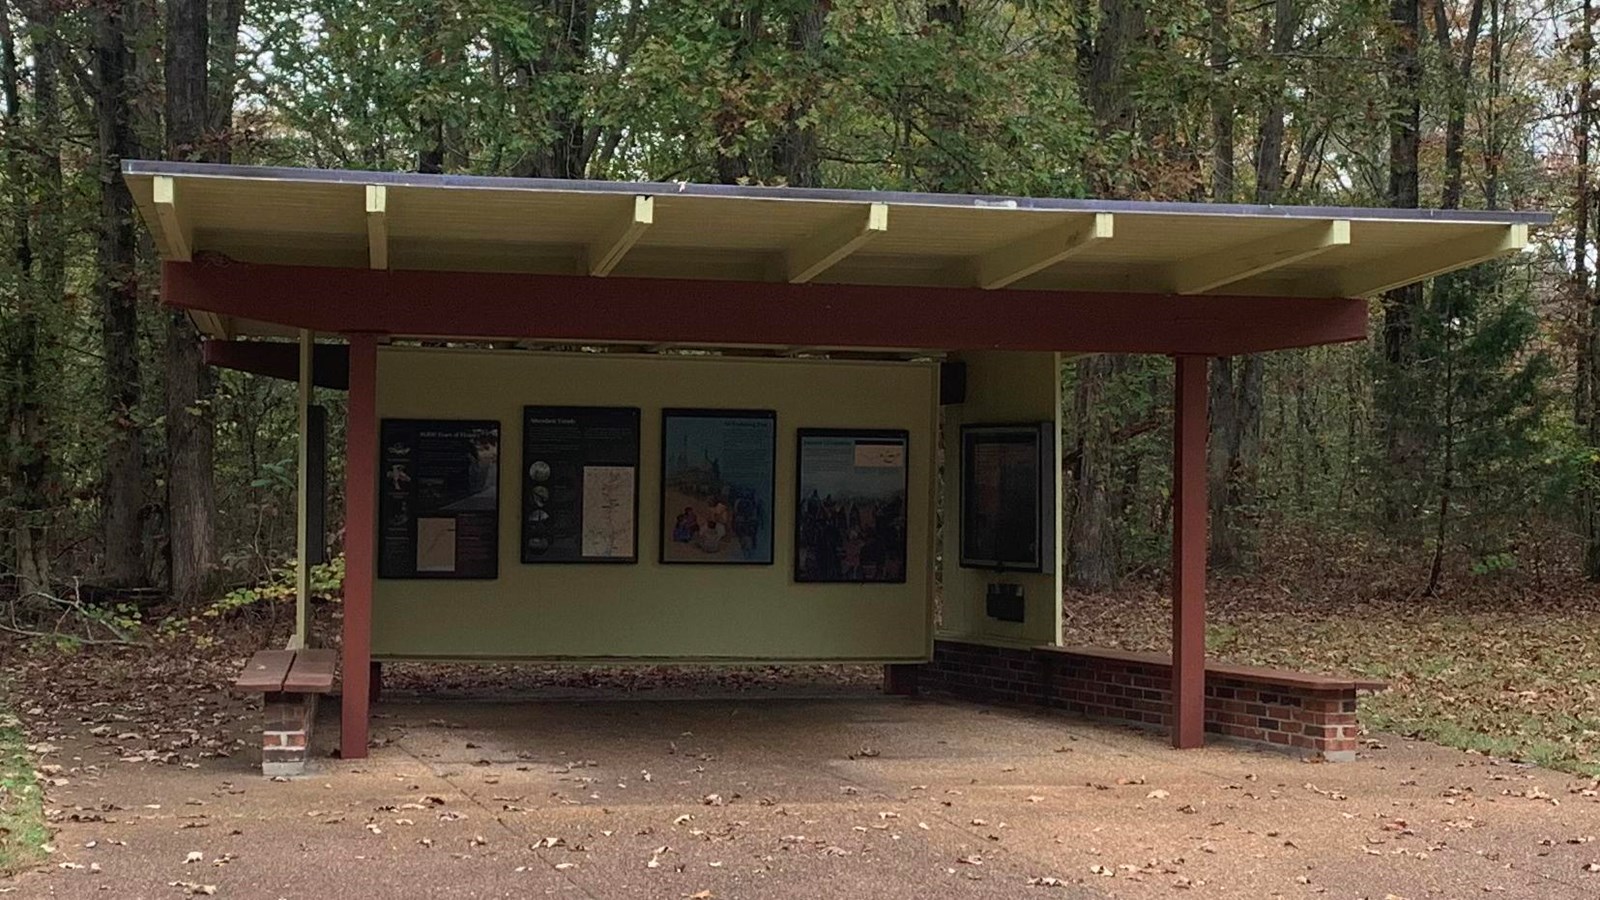 Exhibit shelter with info panels on back wall. fourth panel on right is about trail of tears